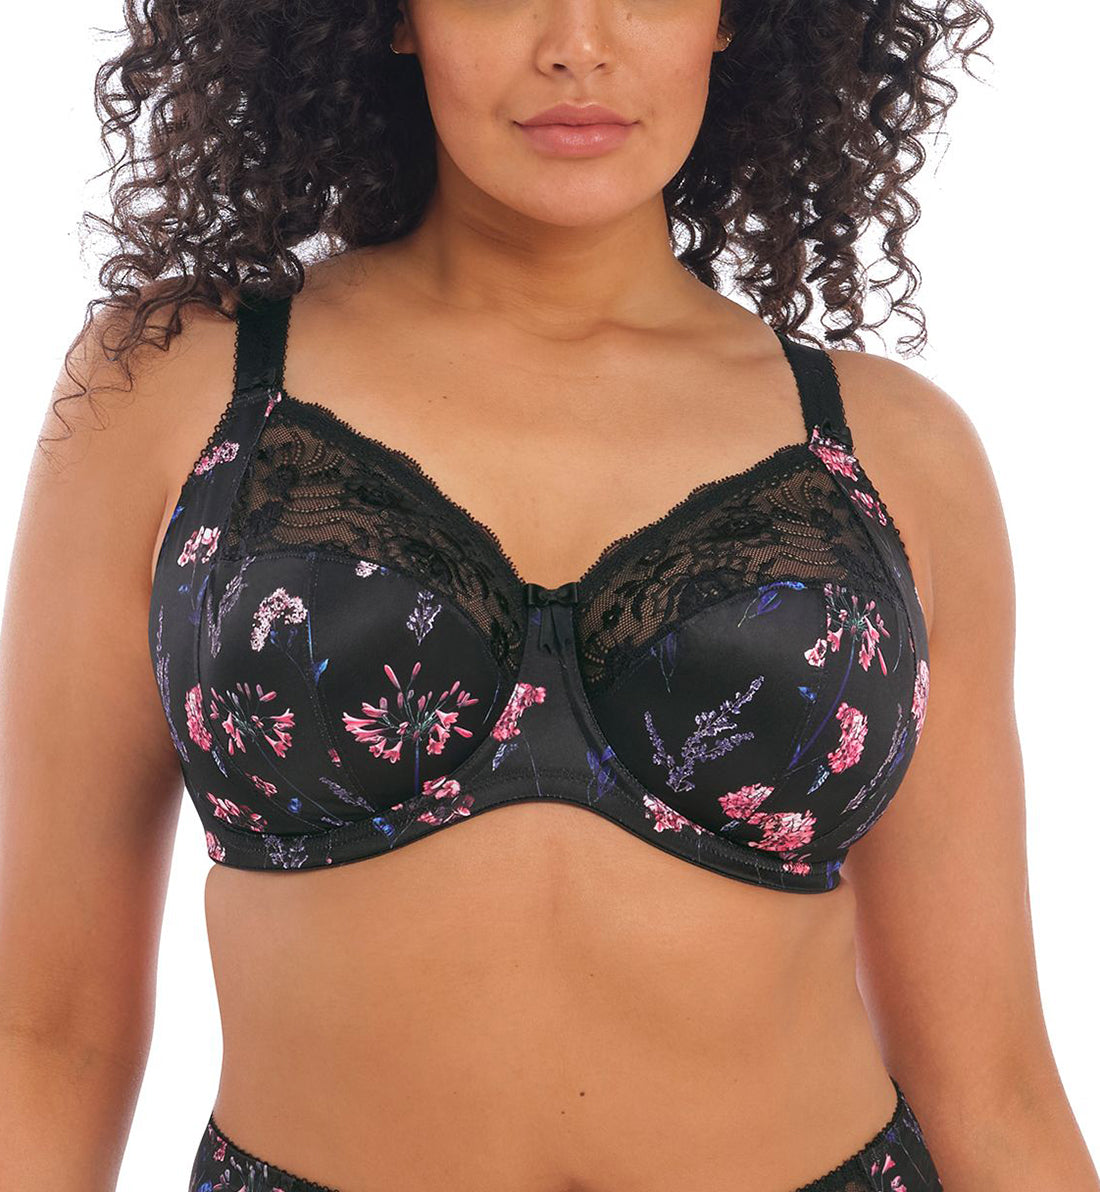 Elomi Morgan Stretch Lace Banded Underwire Bra (4110)- Pink Floral